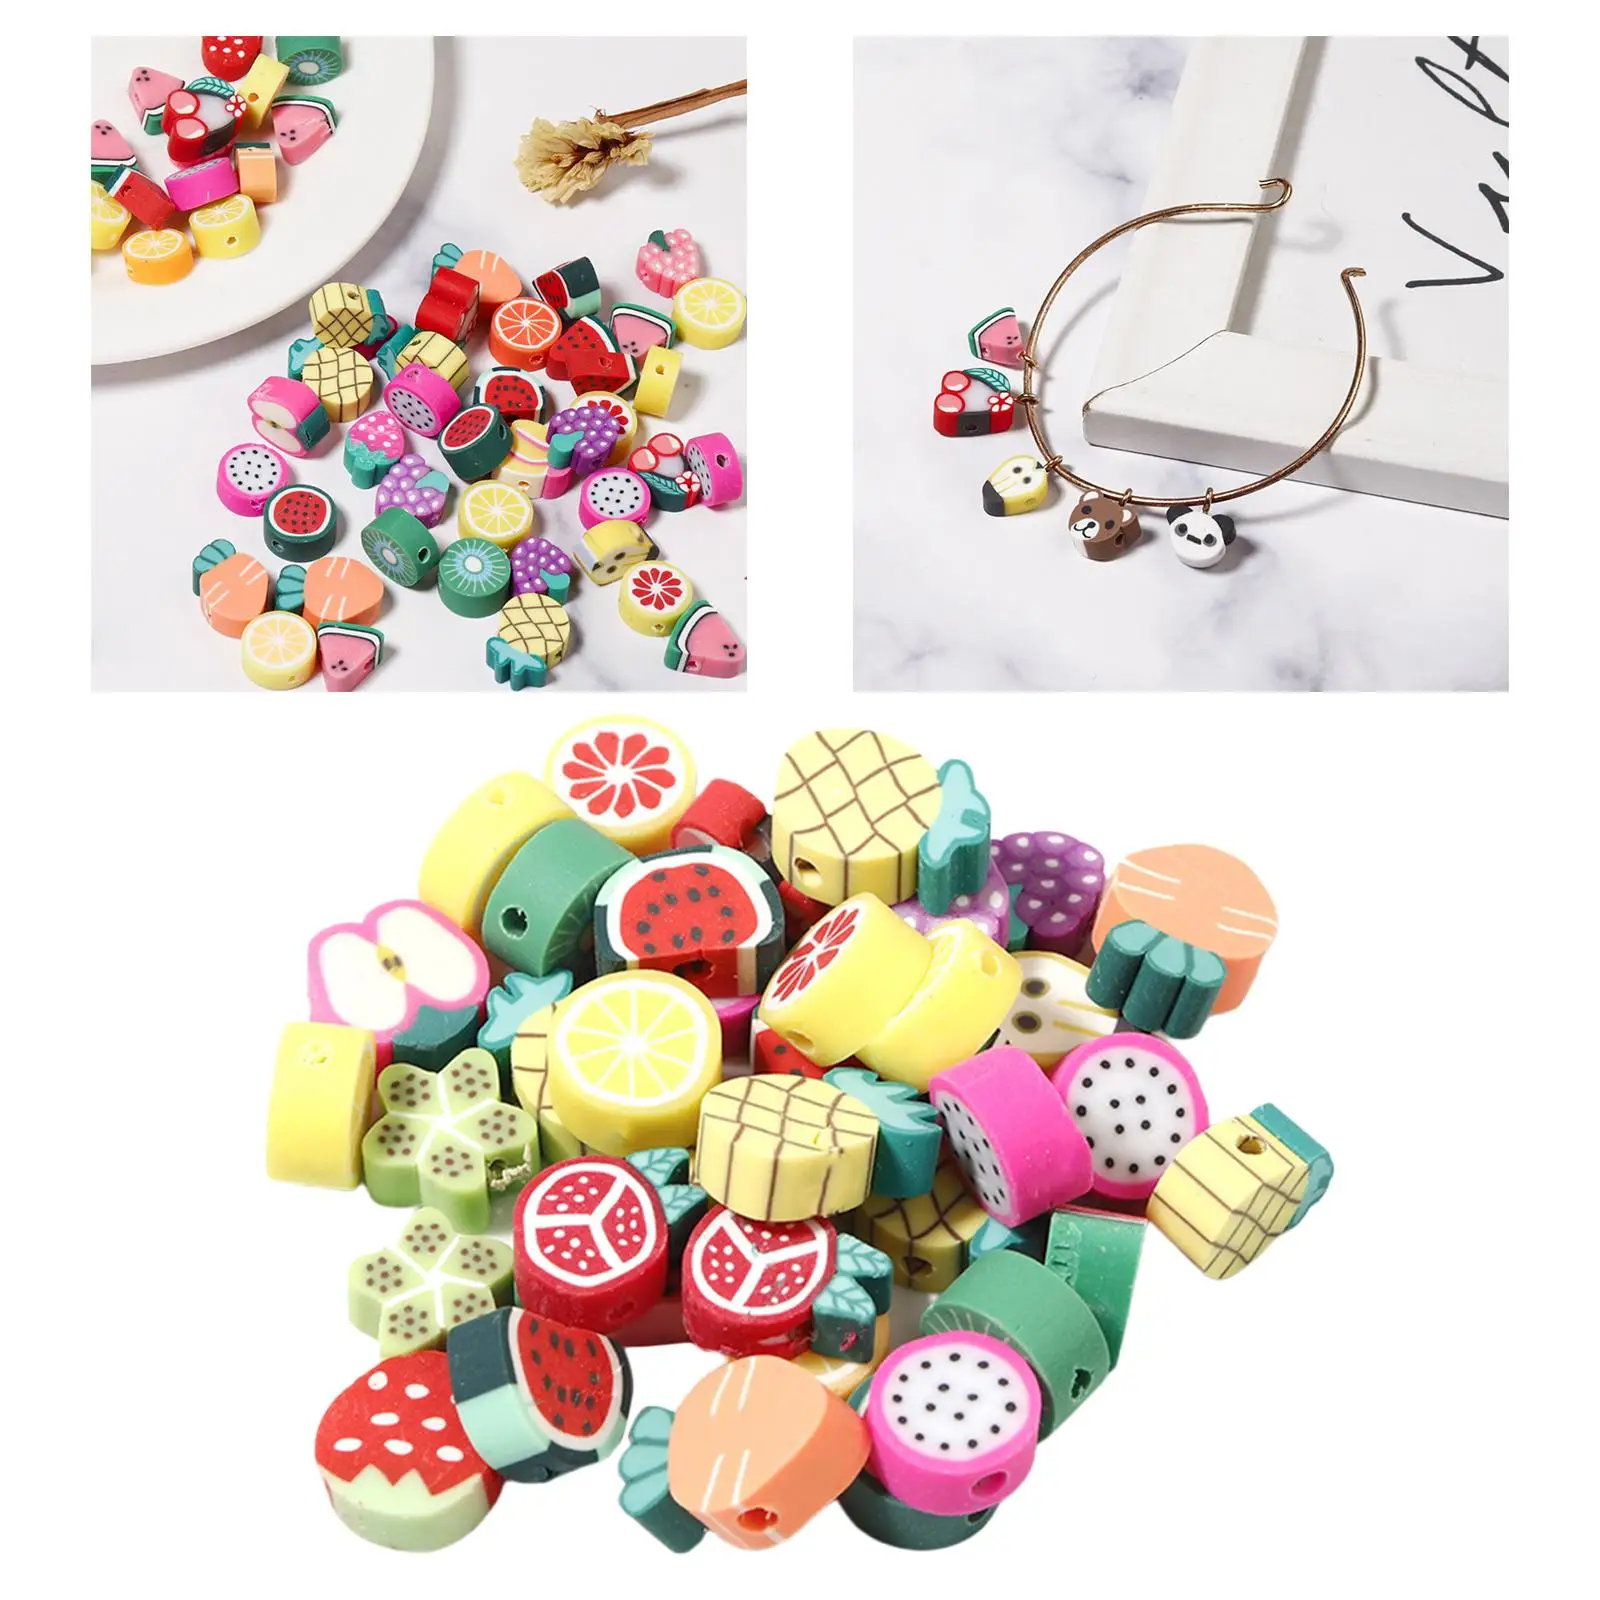 100 Pieces Polymer Clay Beads Fruit Slices Beads Loose Spacer Bead for Jewelry